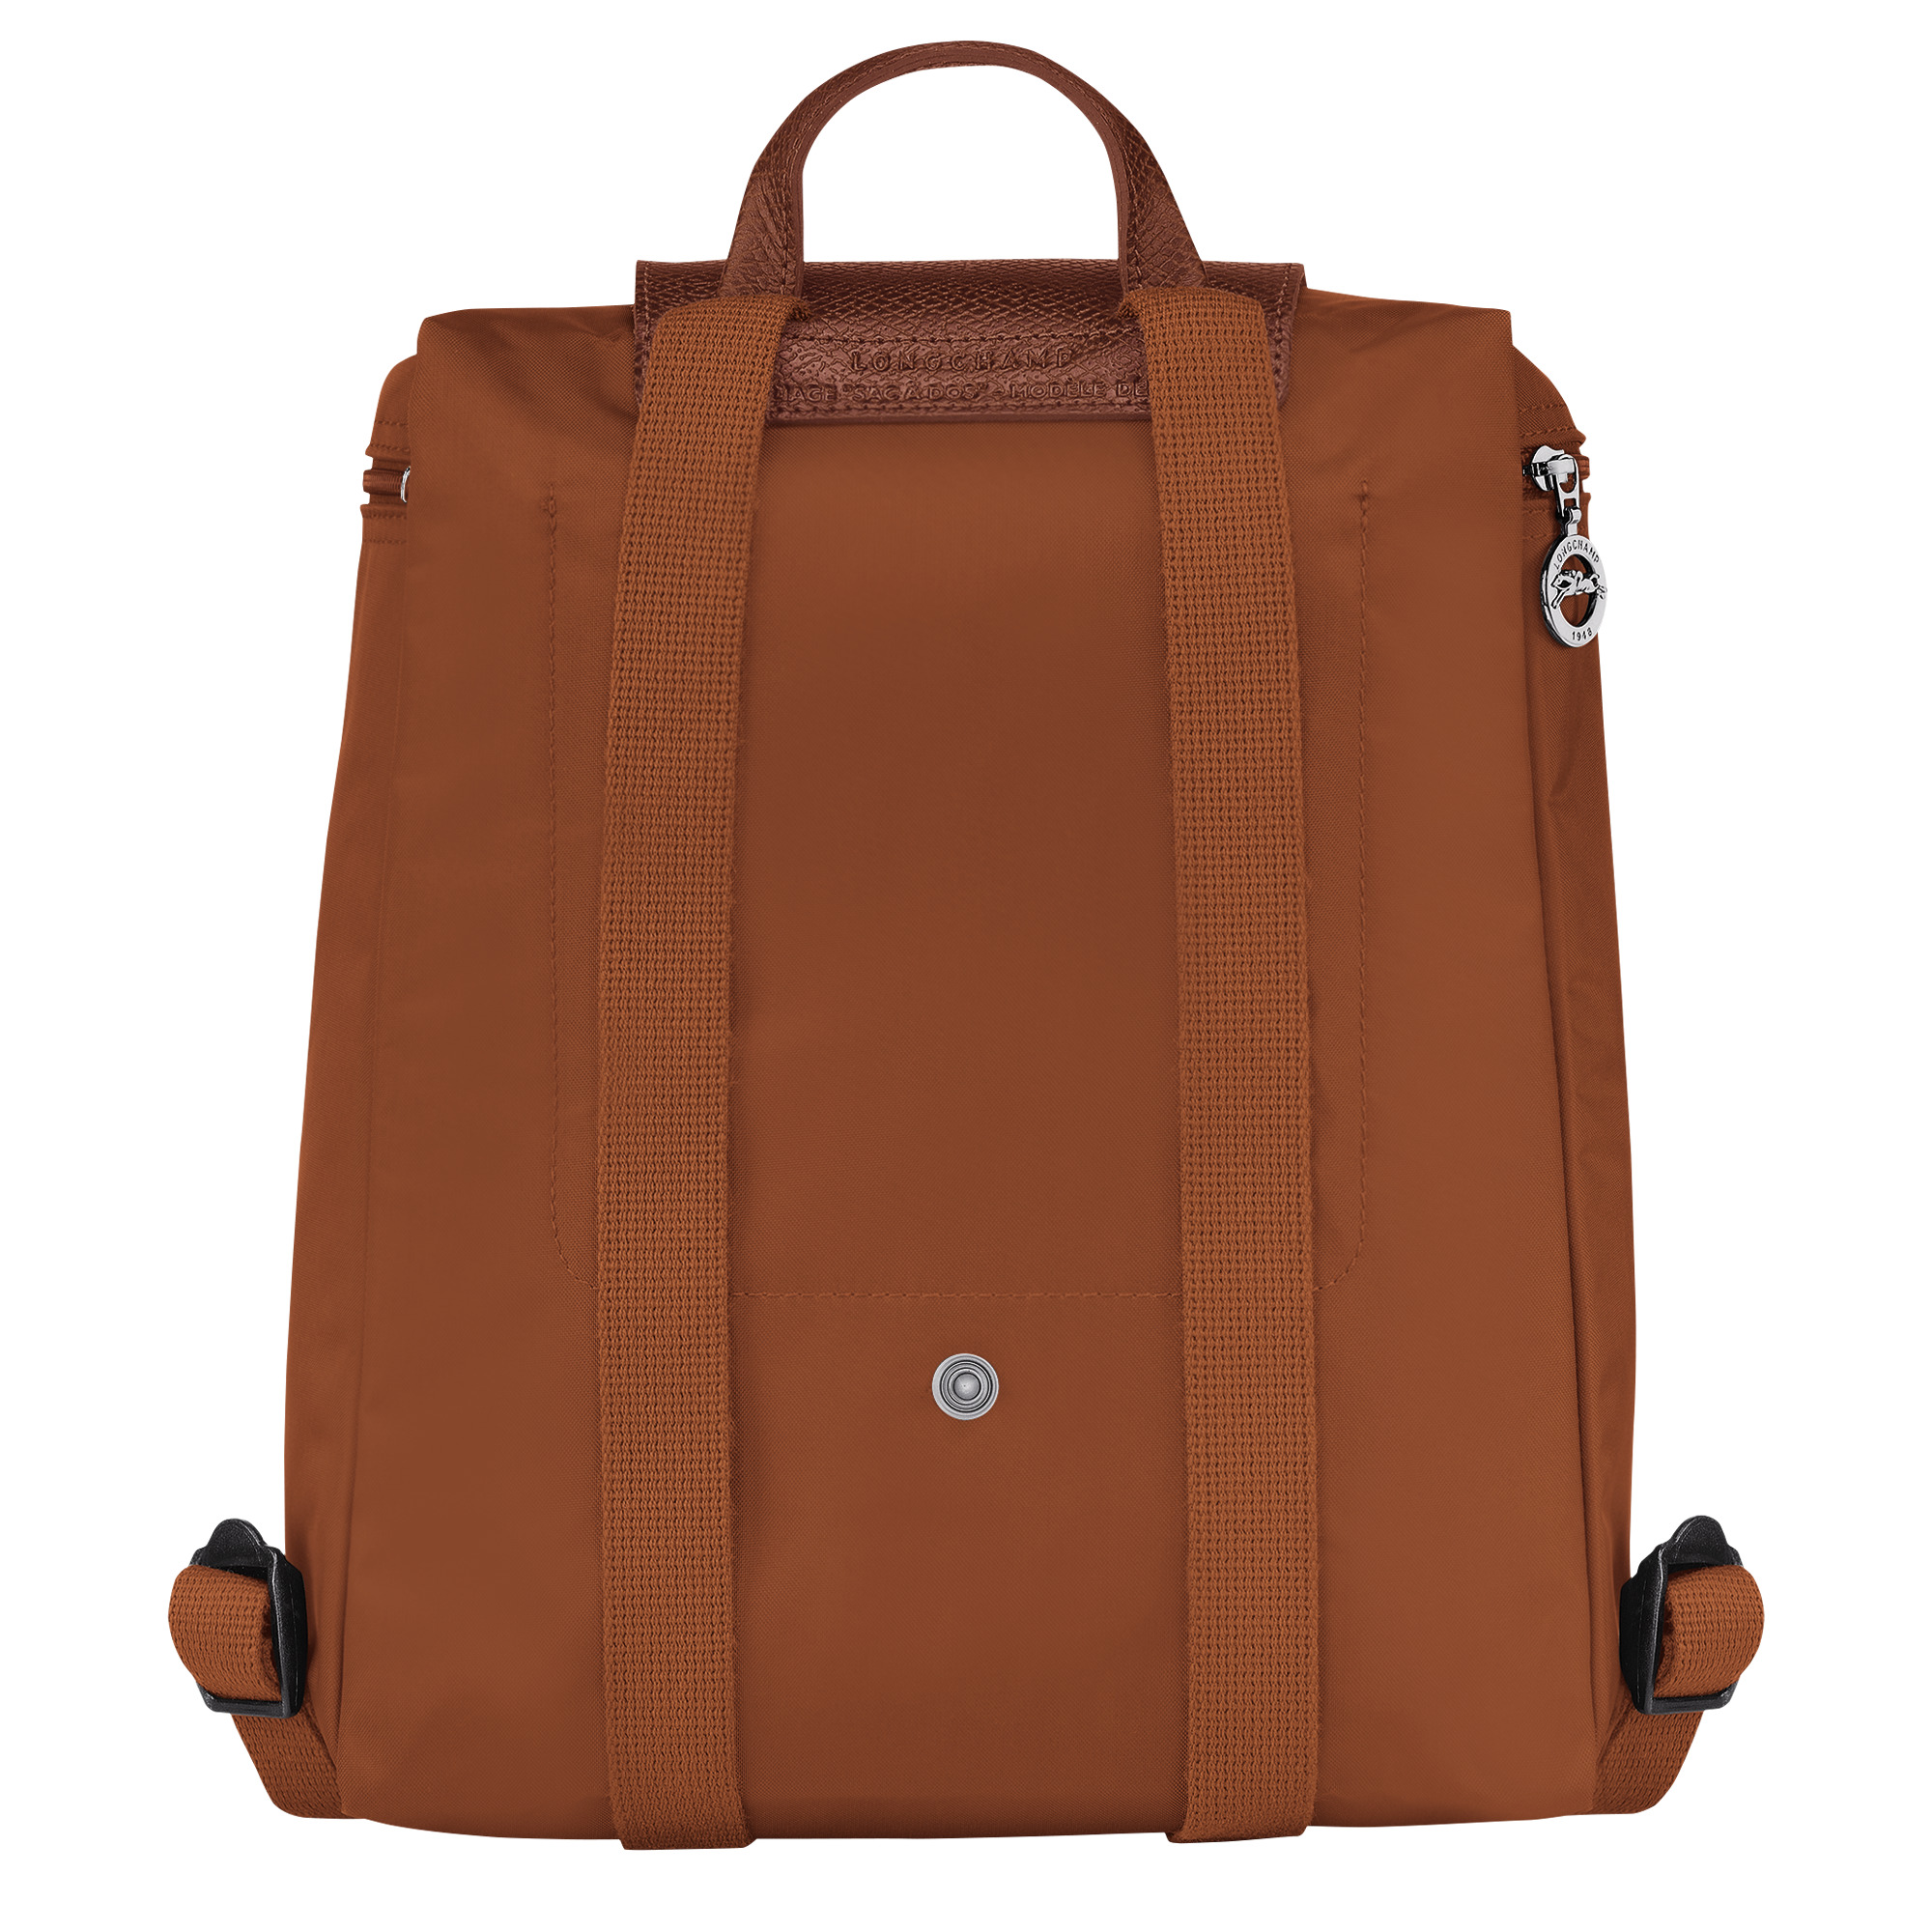 Le Pliage Green M Backpack Cognac - Recycled canvas - 3